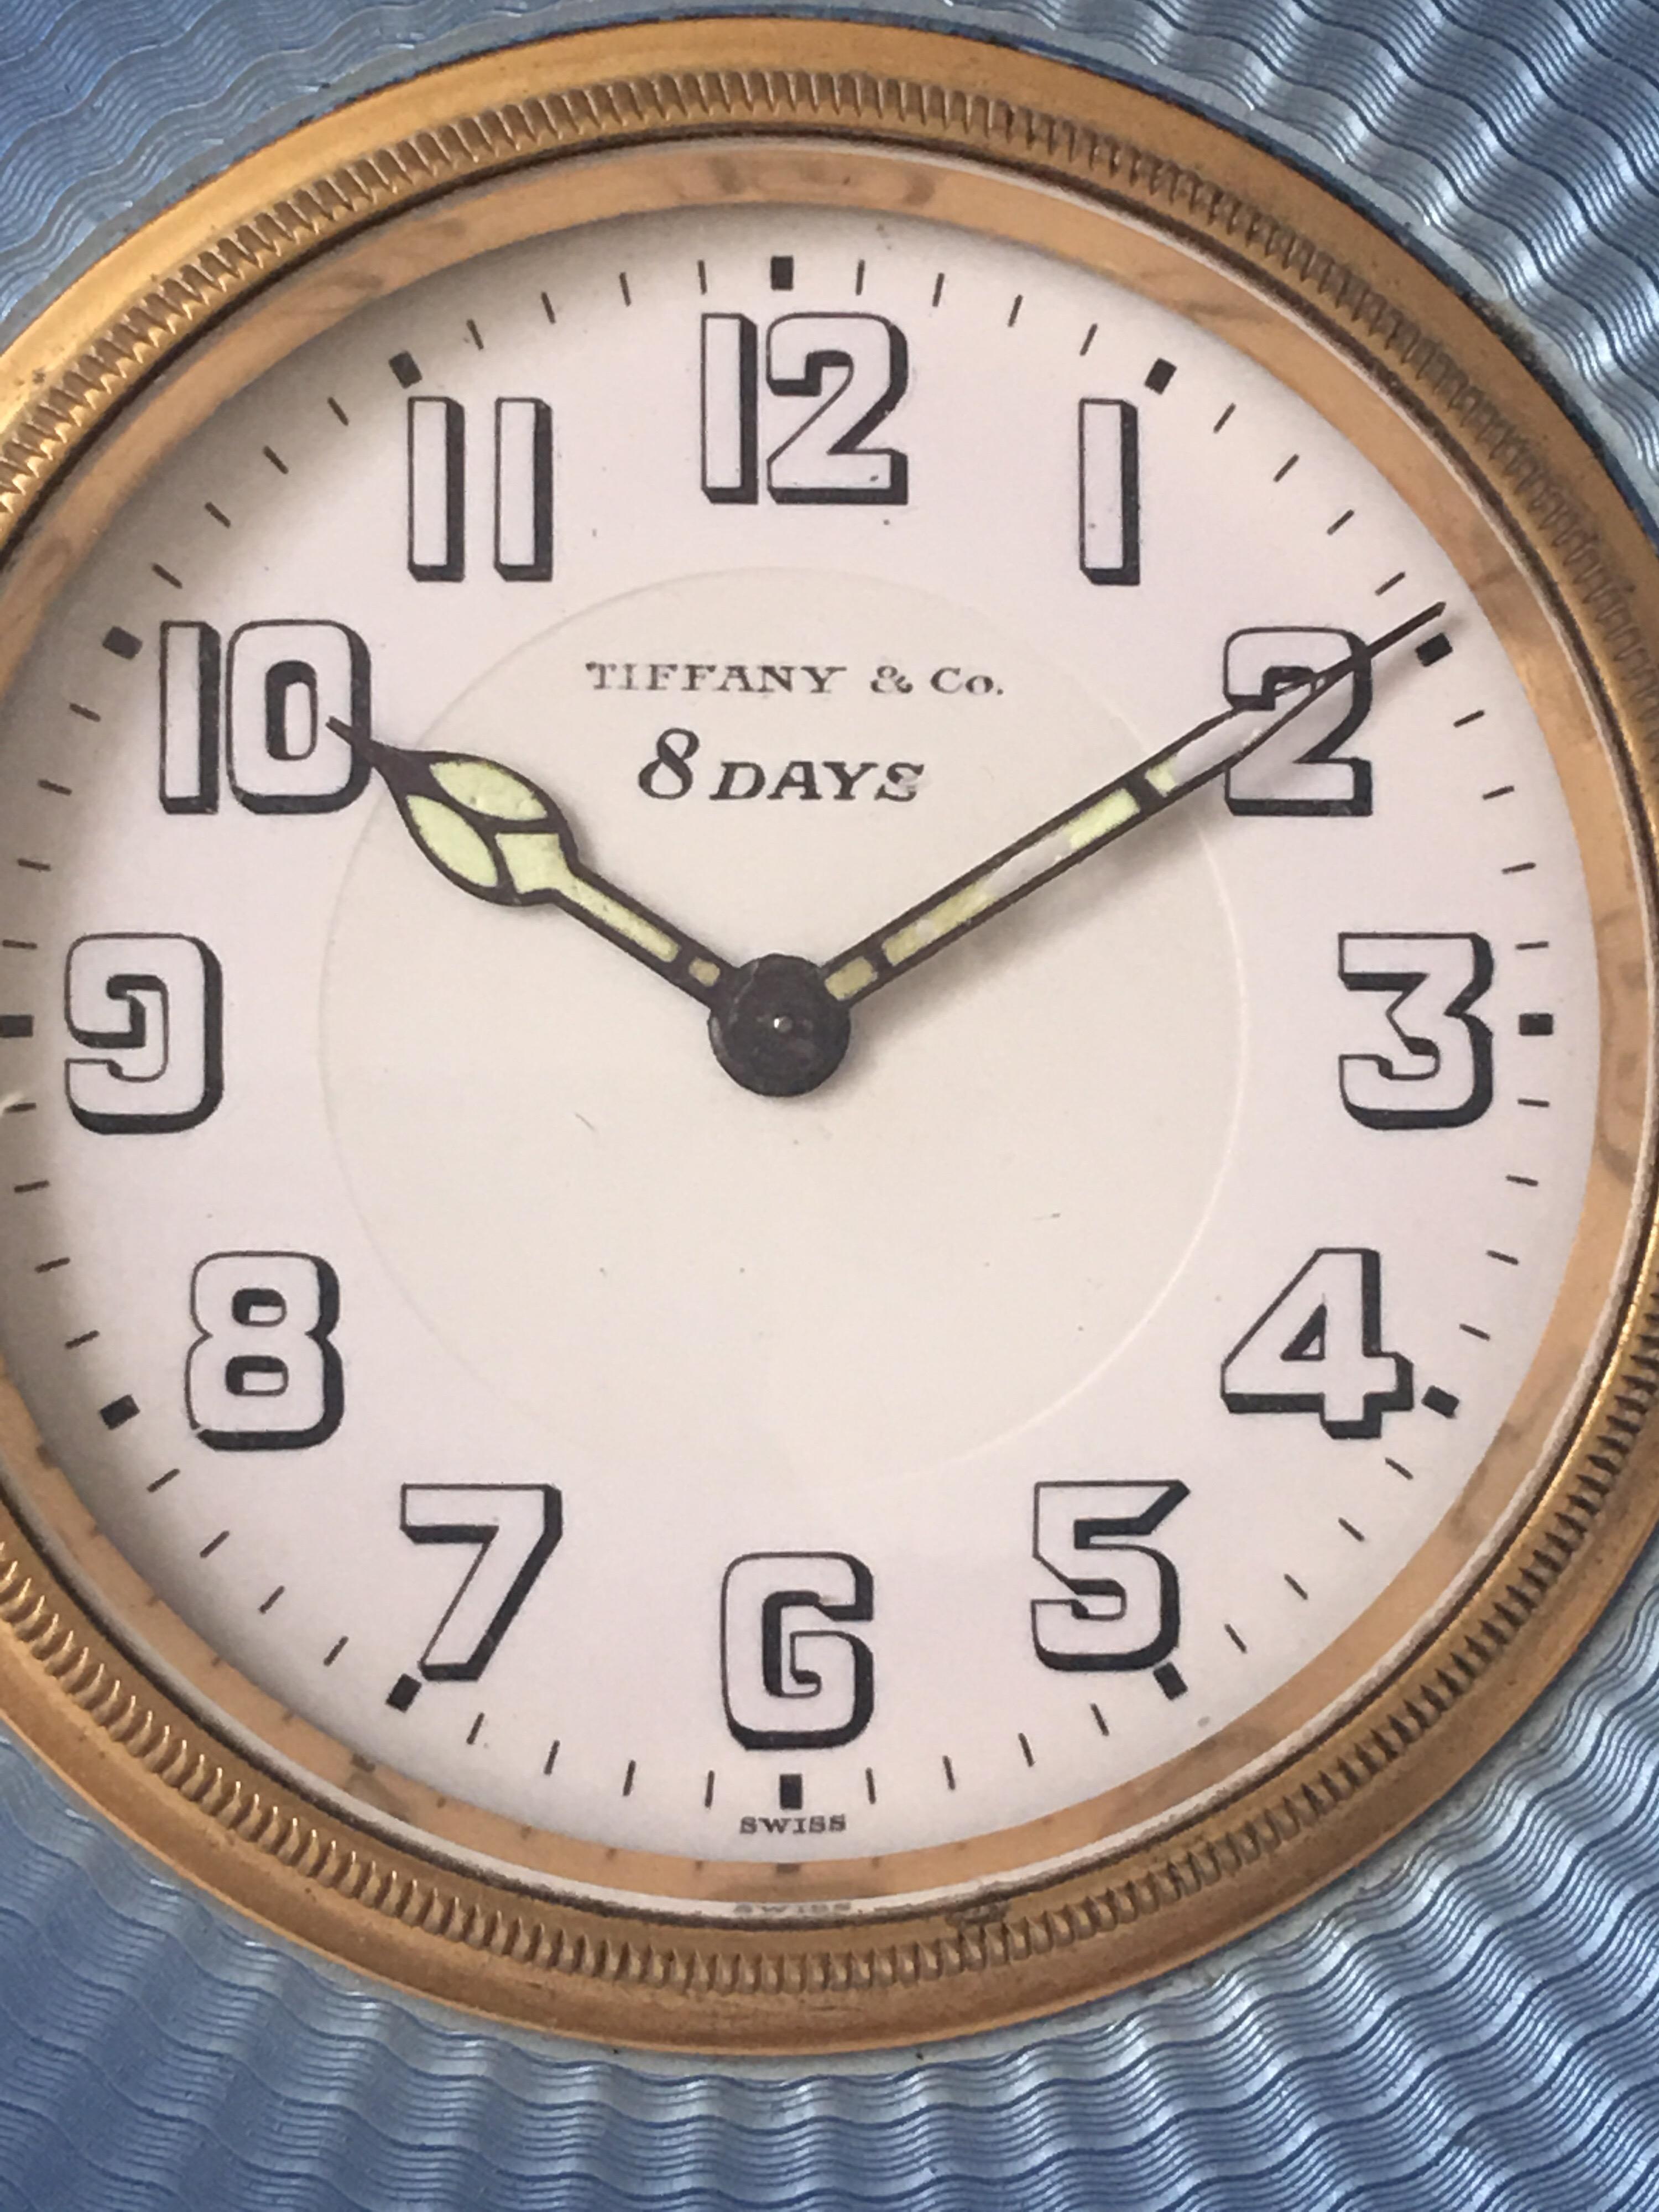 Antique Silver Tiffany & Co. Travel Clock For Sale 1